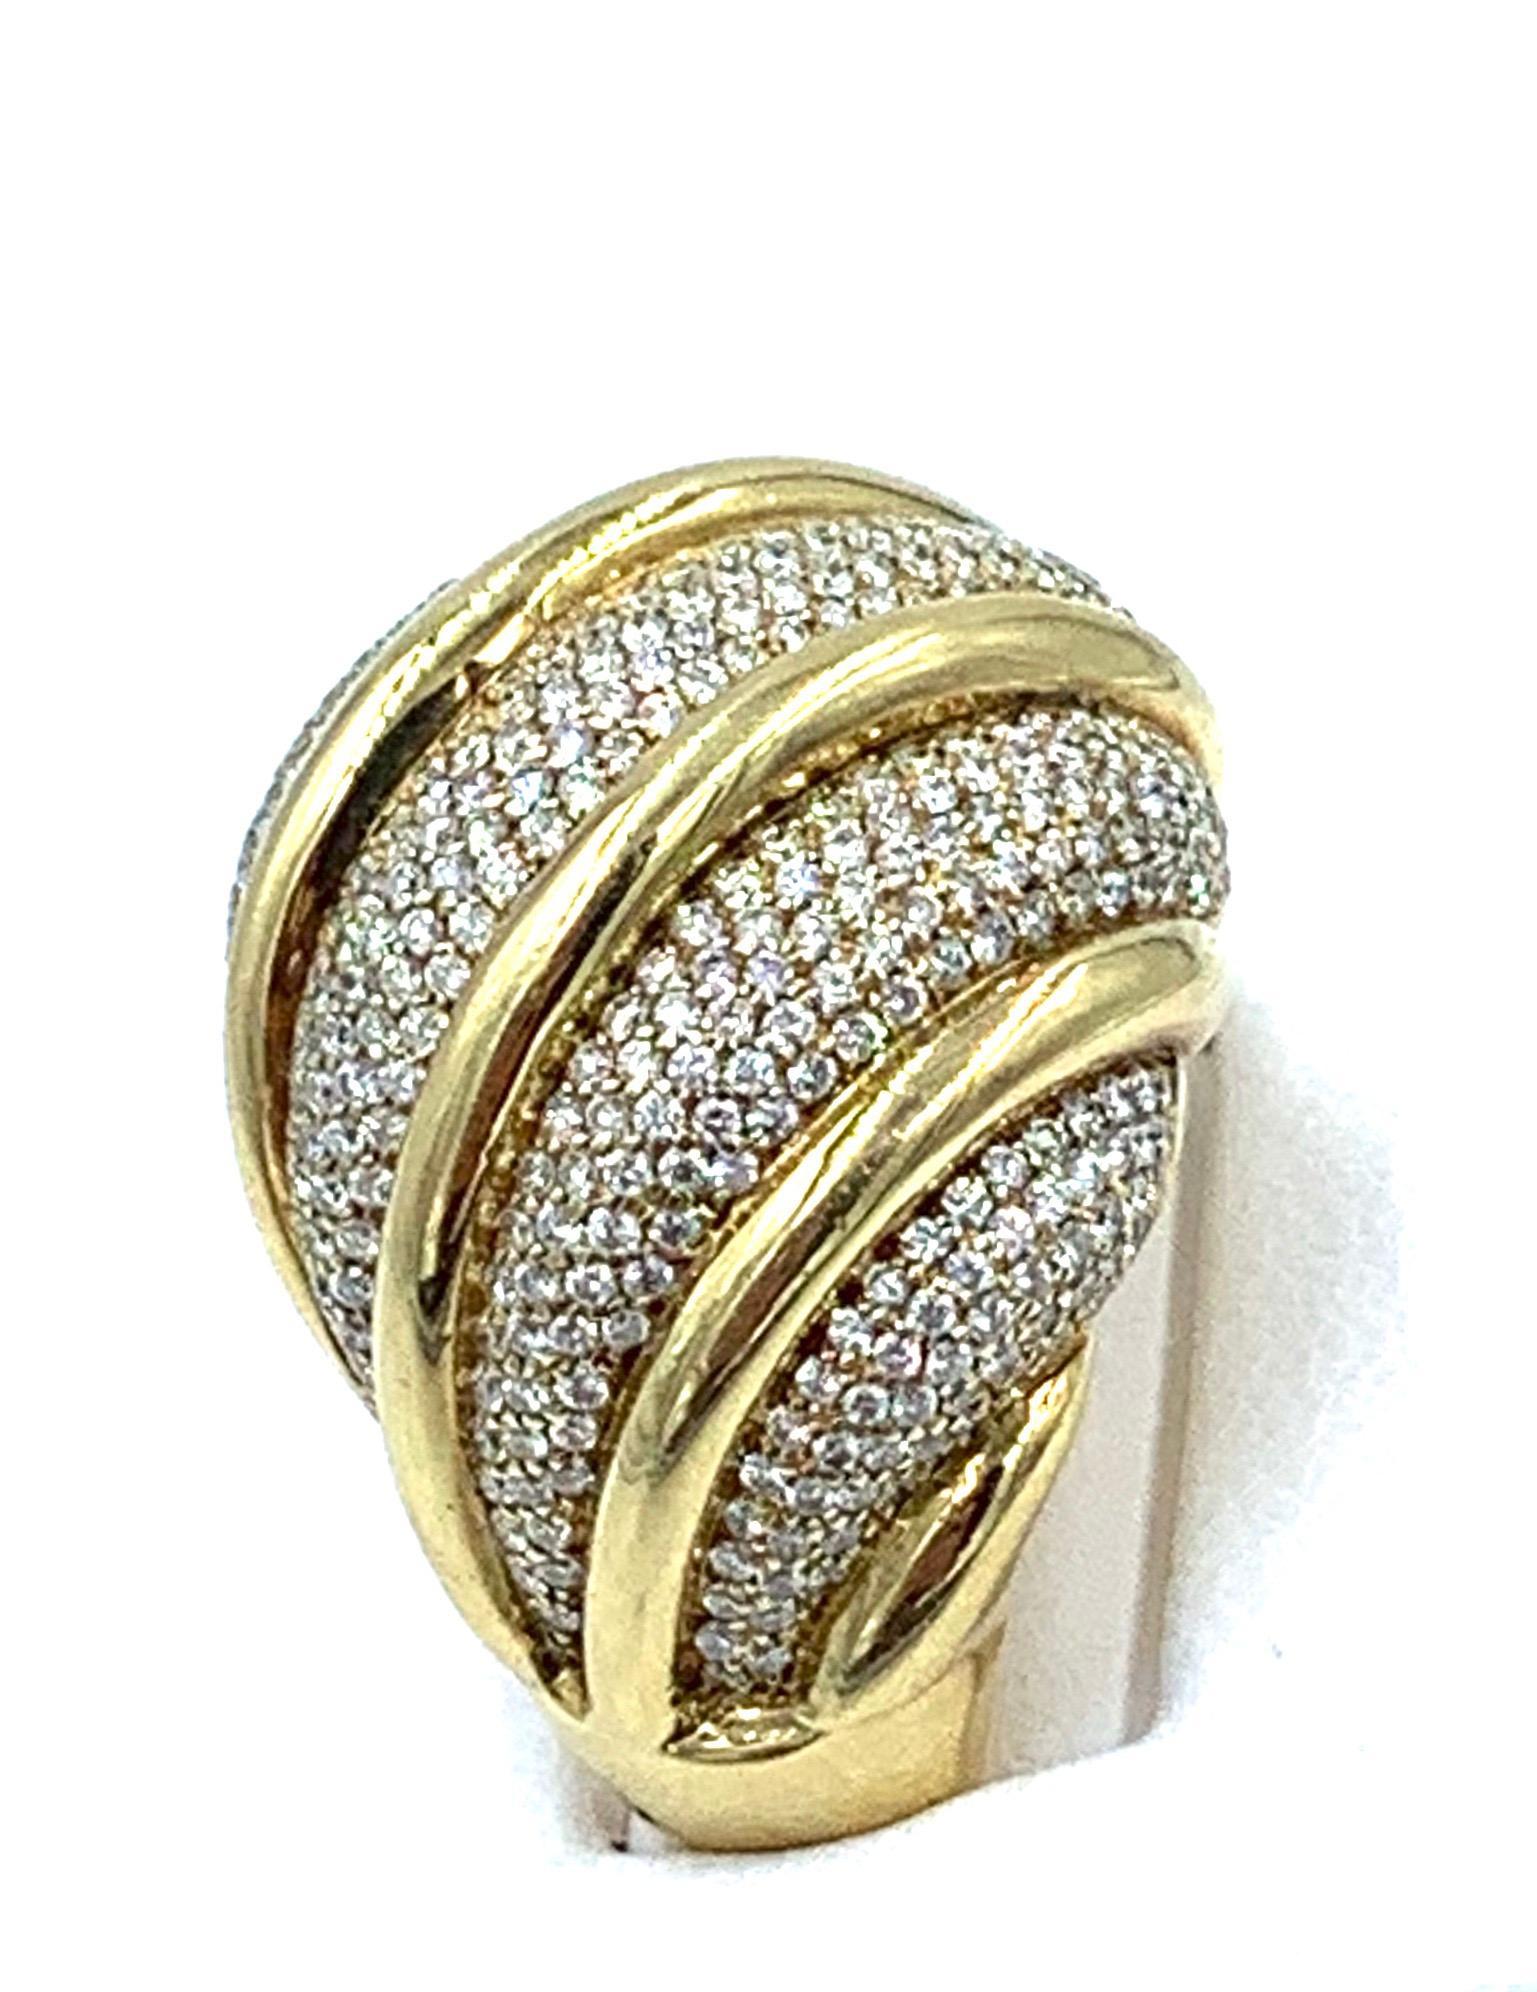 Classic and beautiful 18 karat yellow gold and diamond dome ring.  This is a very wearable and timeless piece by Tiffany’s most famous designer.
Size 6.5
Dia 2.0 carats 
18K Yellow Gold

Signed Paloma Picasso